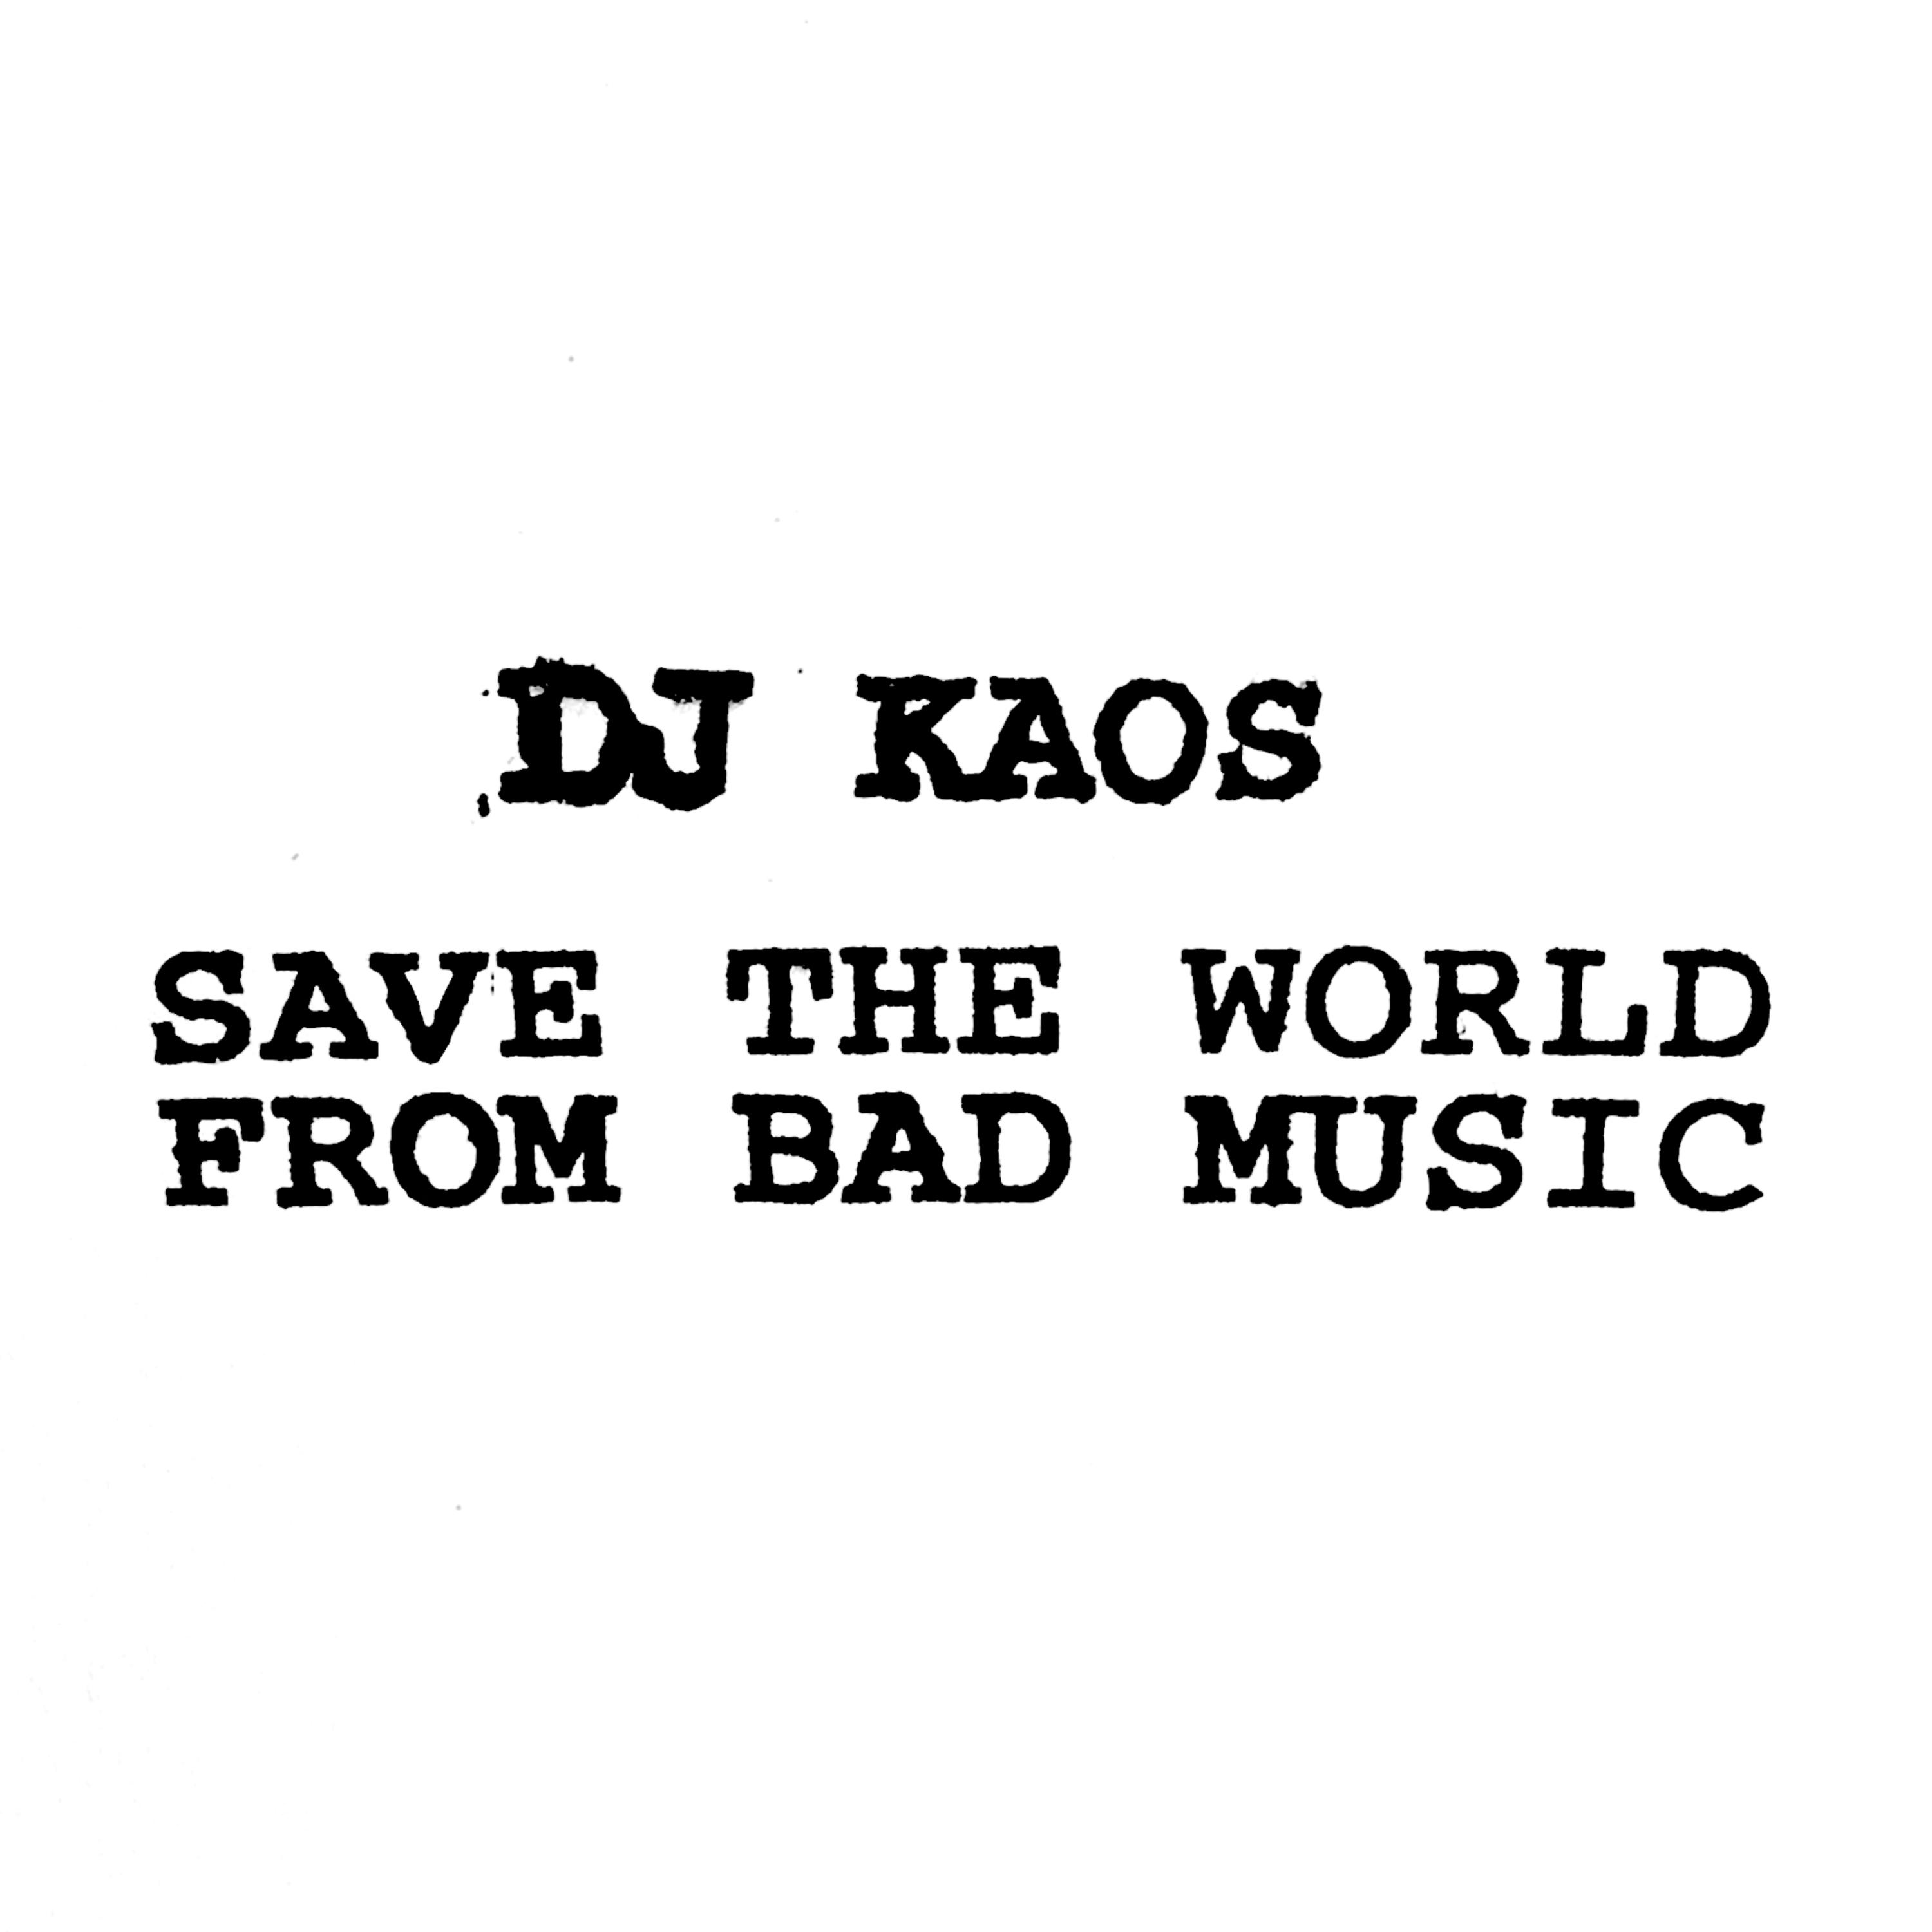 Save the World from Bad Music